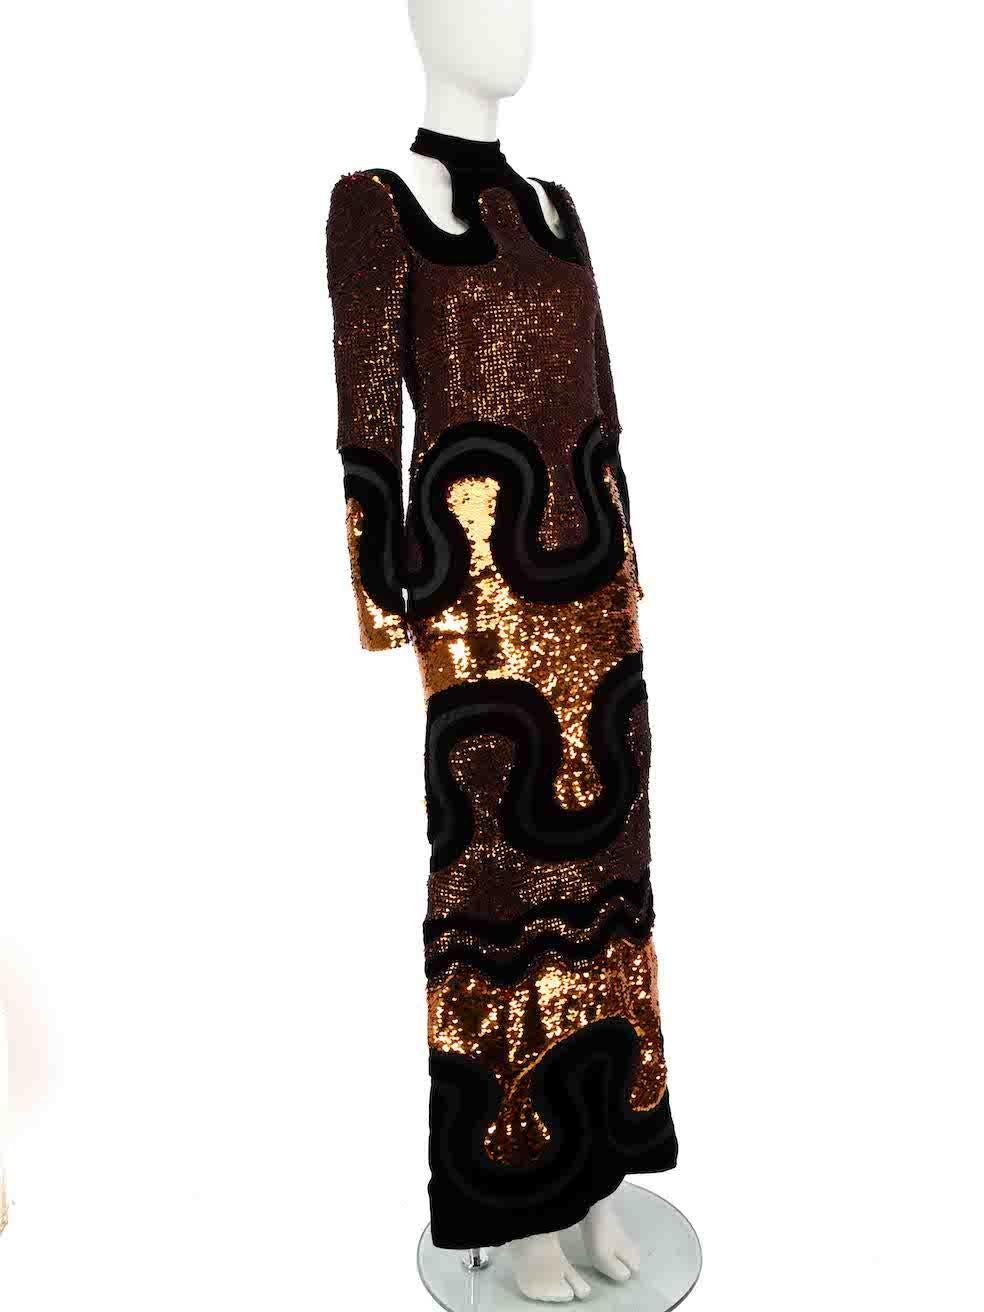 CONDITION is Very good. Hardly any visible wear to dress is evident on this used Tom Ford designer resale item.
 
 
 
 Details
 
 
 Black
 
 Velvet
 
 Gown
 
 Maxi
 
 Brown sequinned pattern
 
 Round neck
 
 Cut out shoulders
 
 Long sleeves
 
 Back